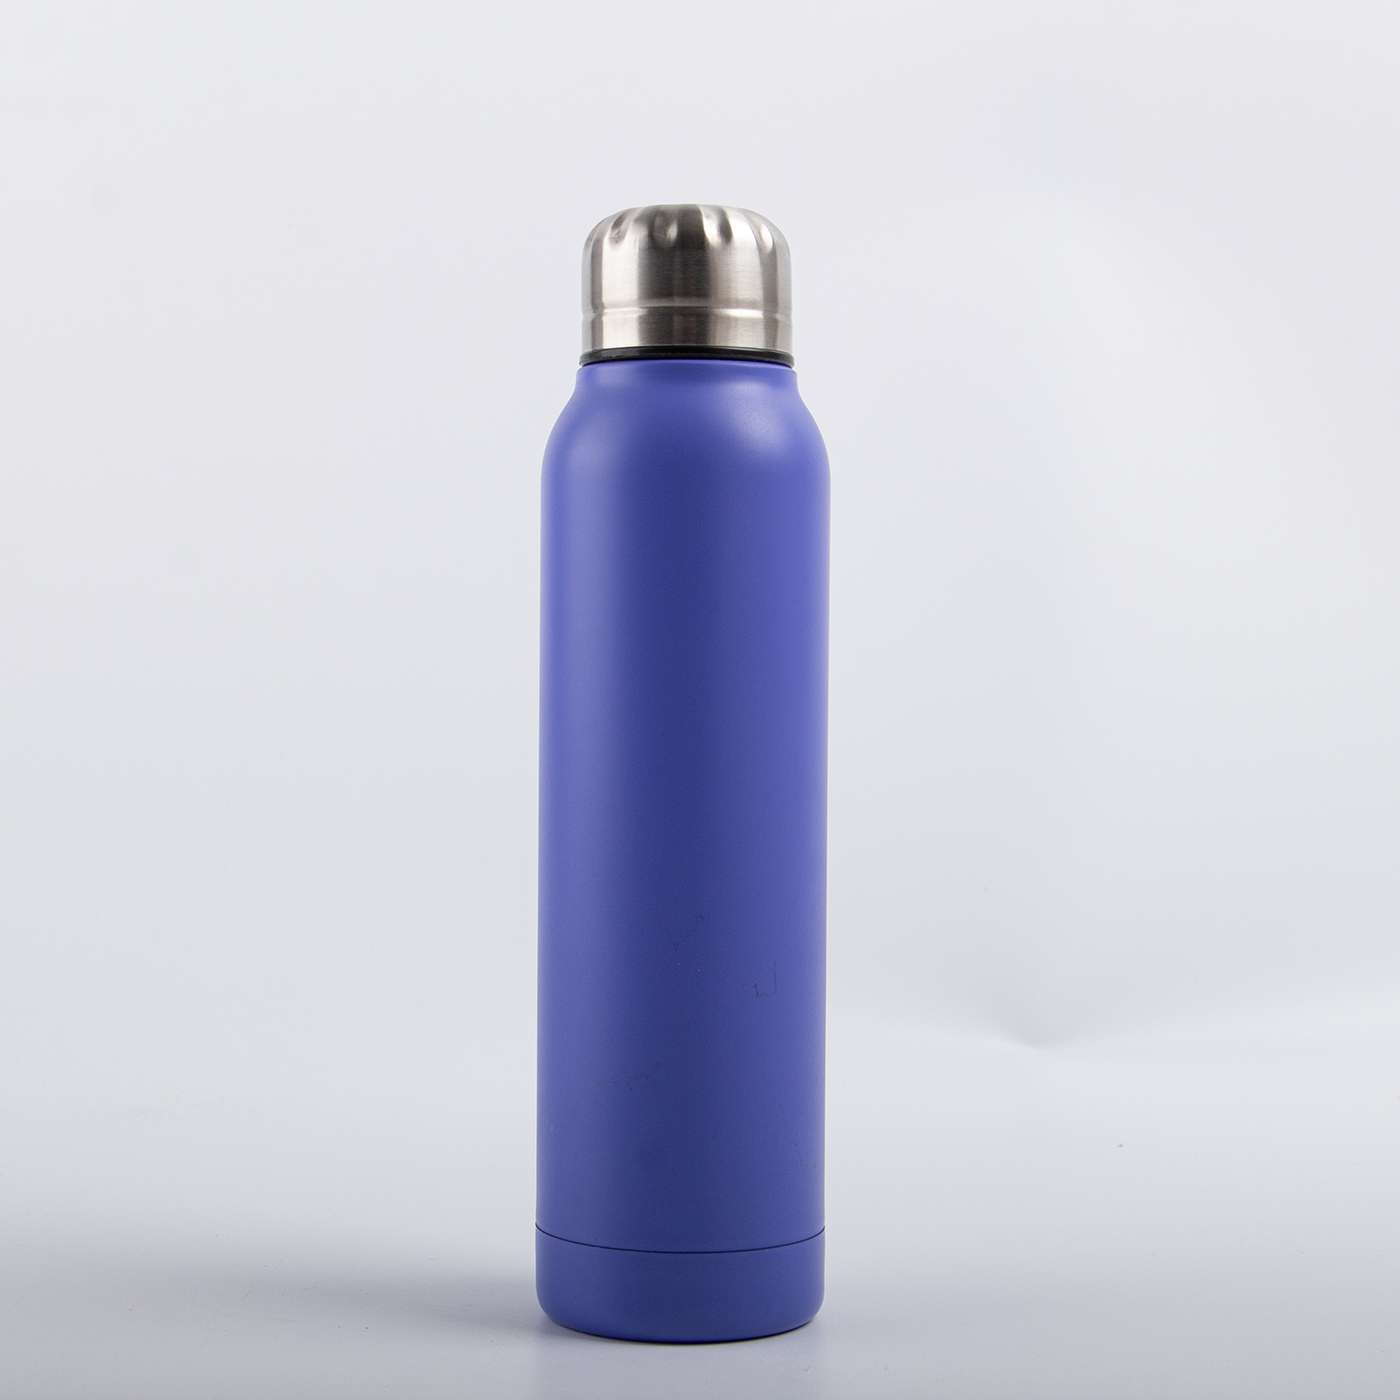 12 oz. Stainless Steel Insulated Water Bottle For Kids3